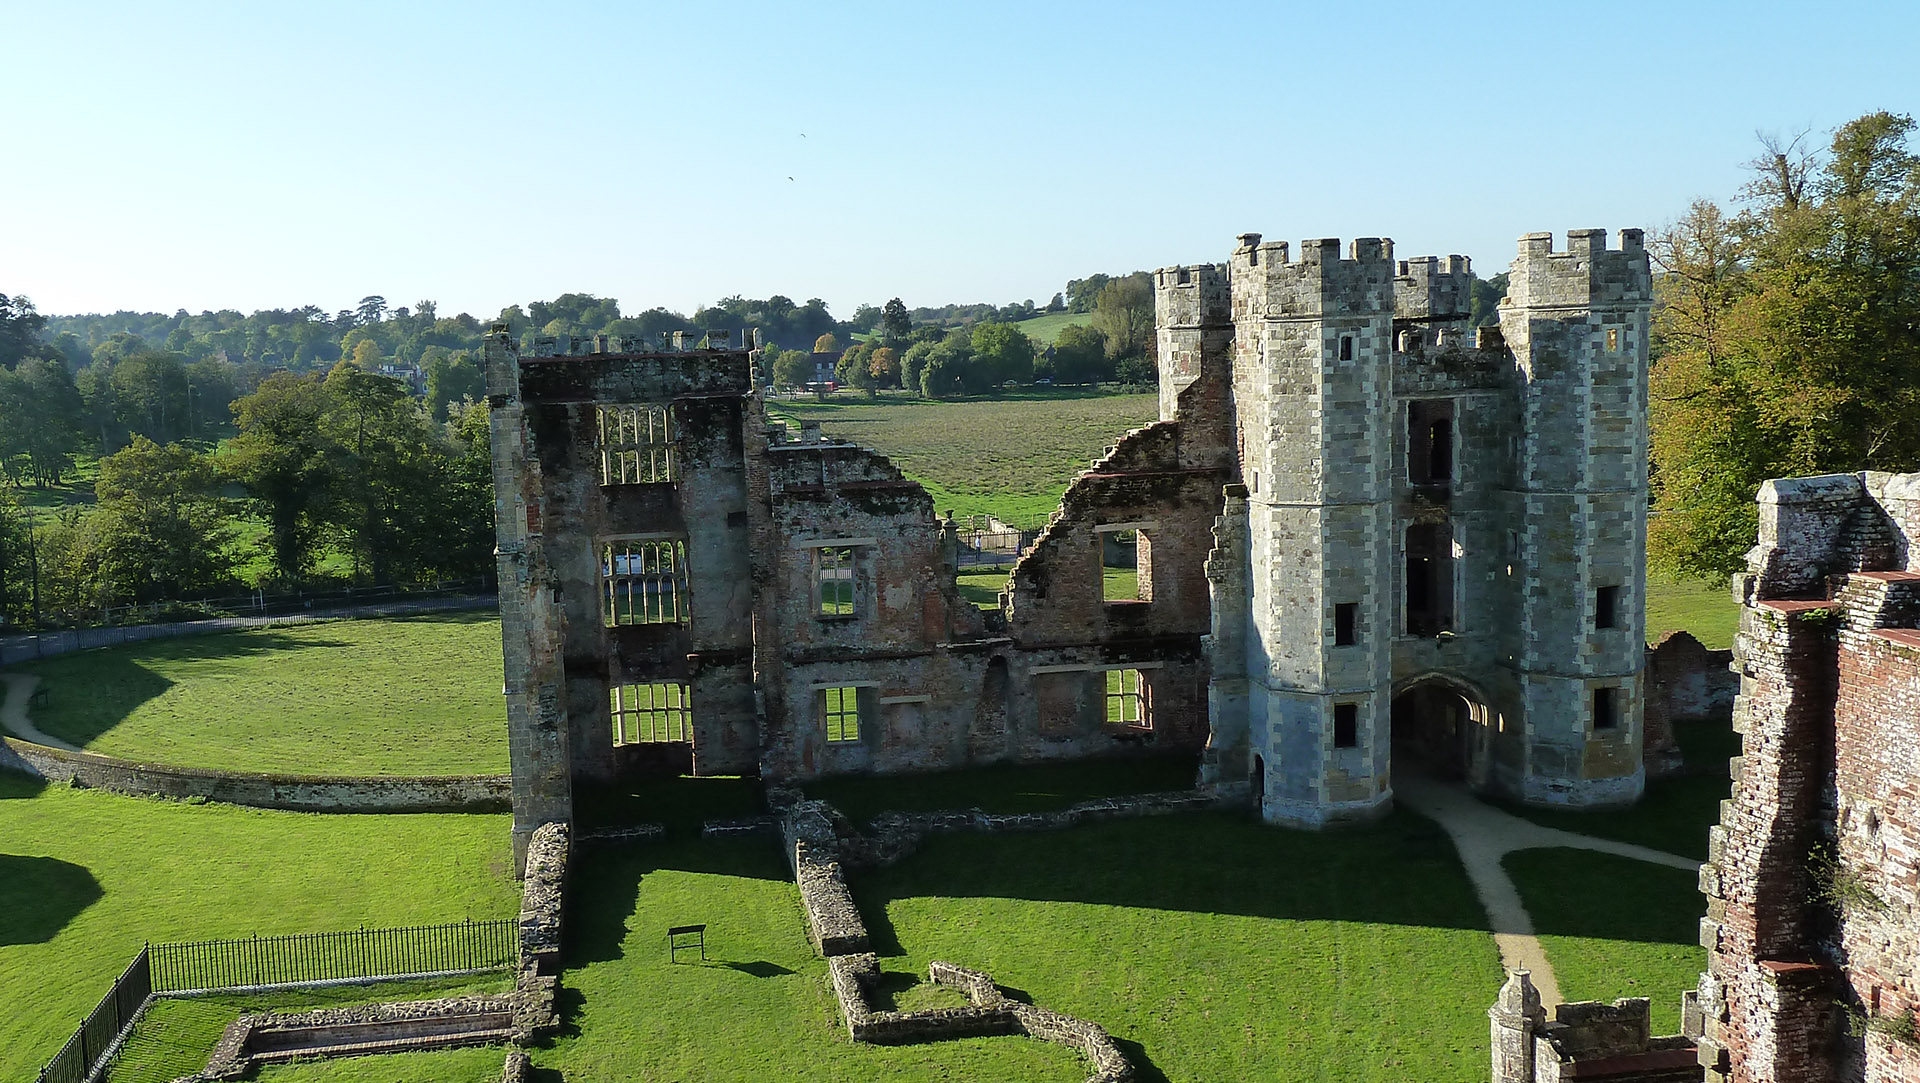 Ruins at Cowdray Estate, West Sussex